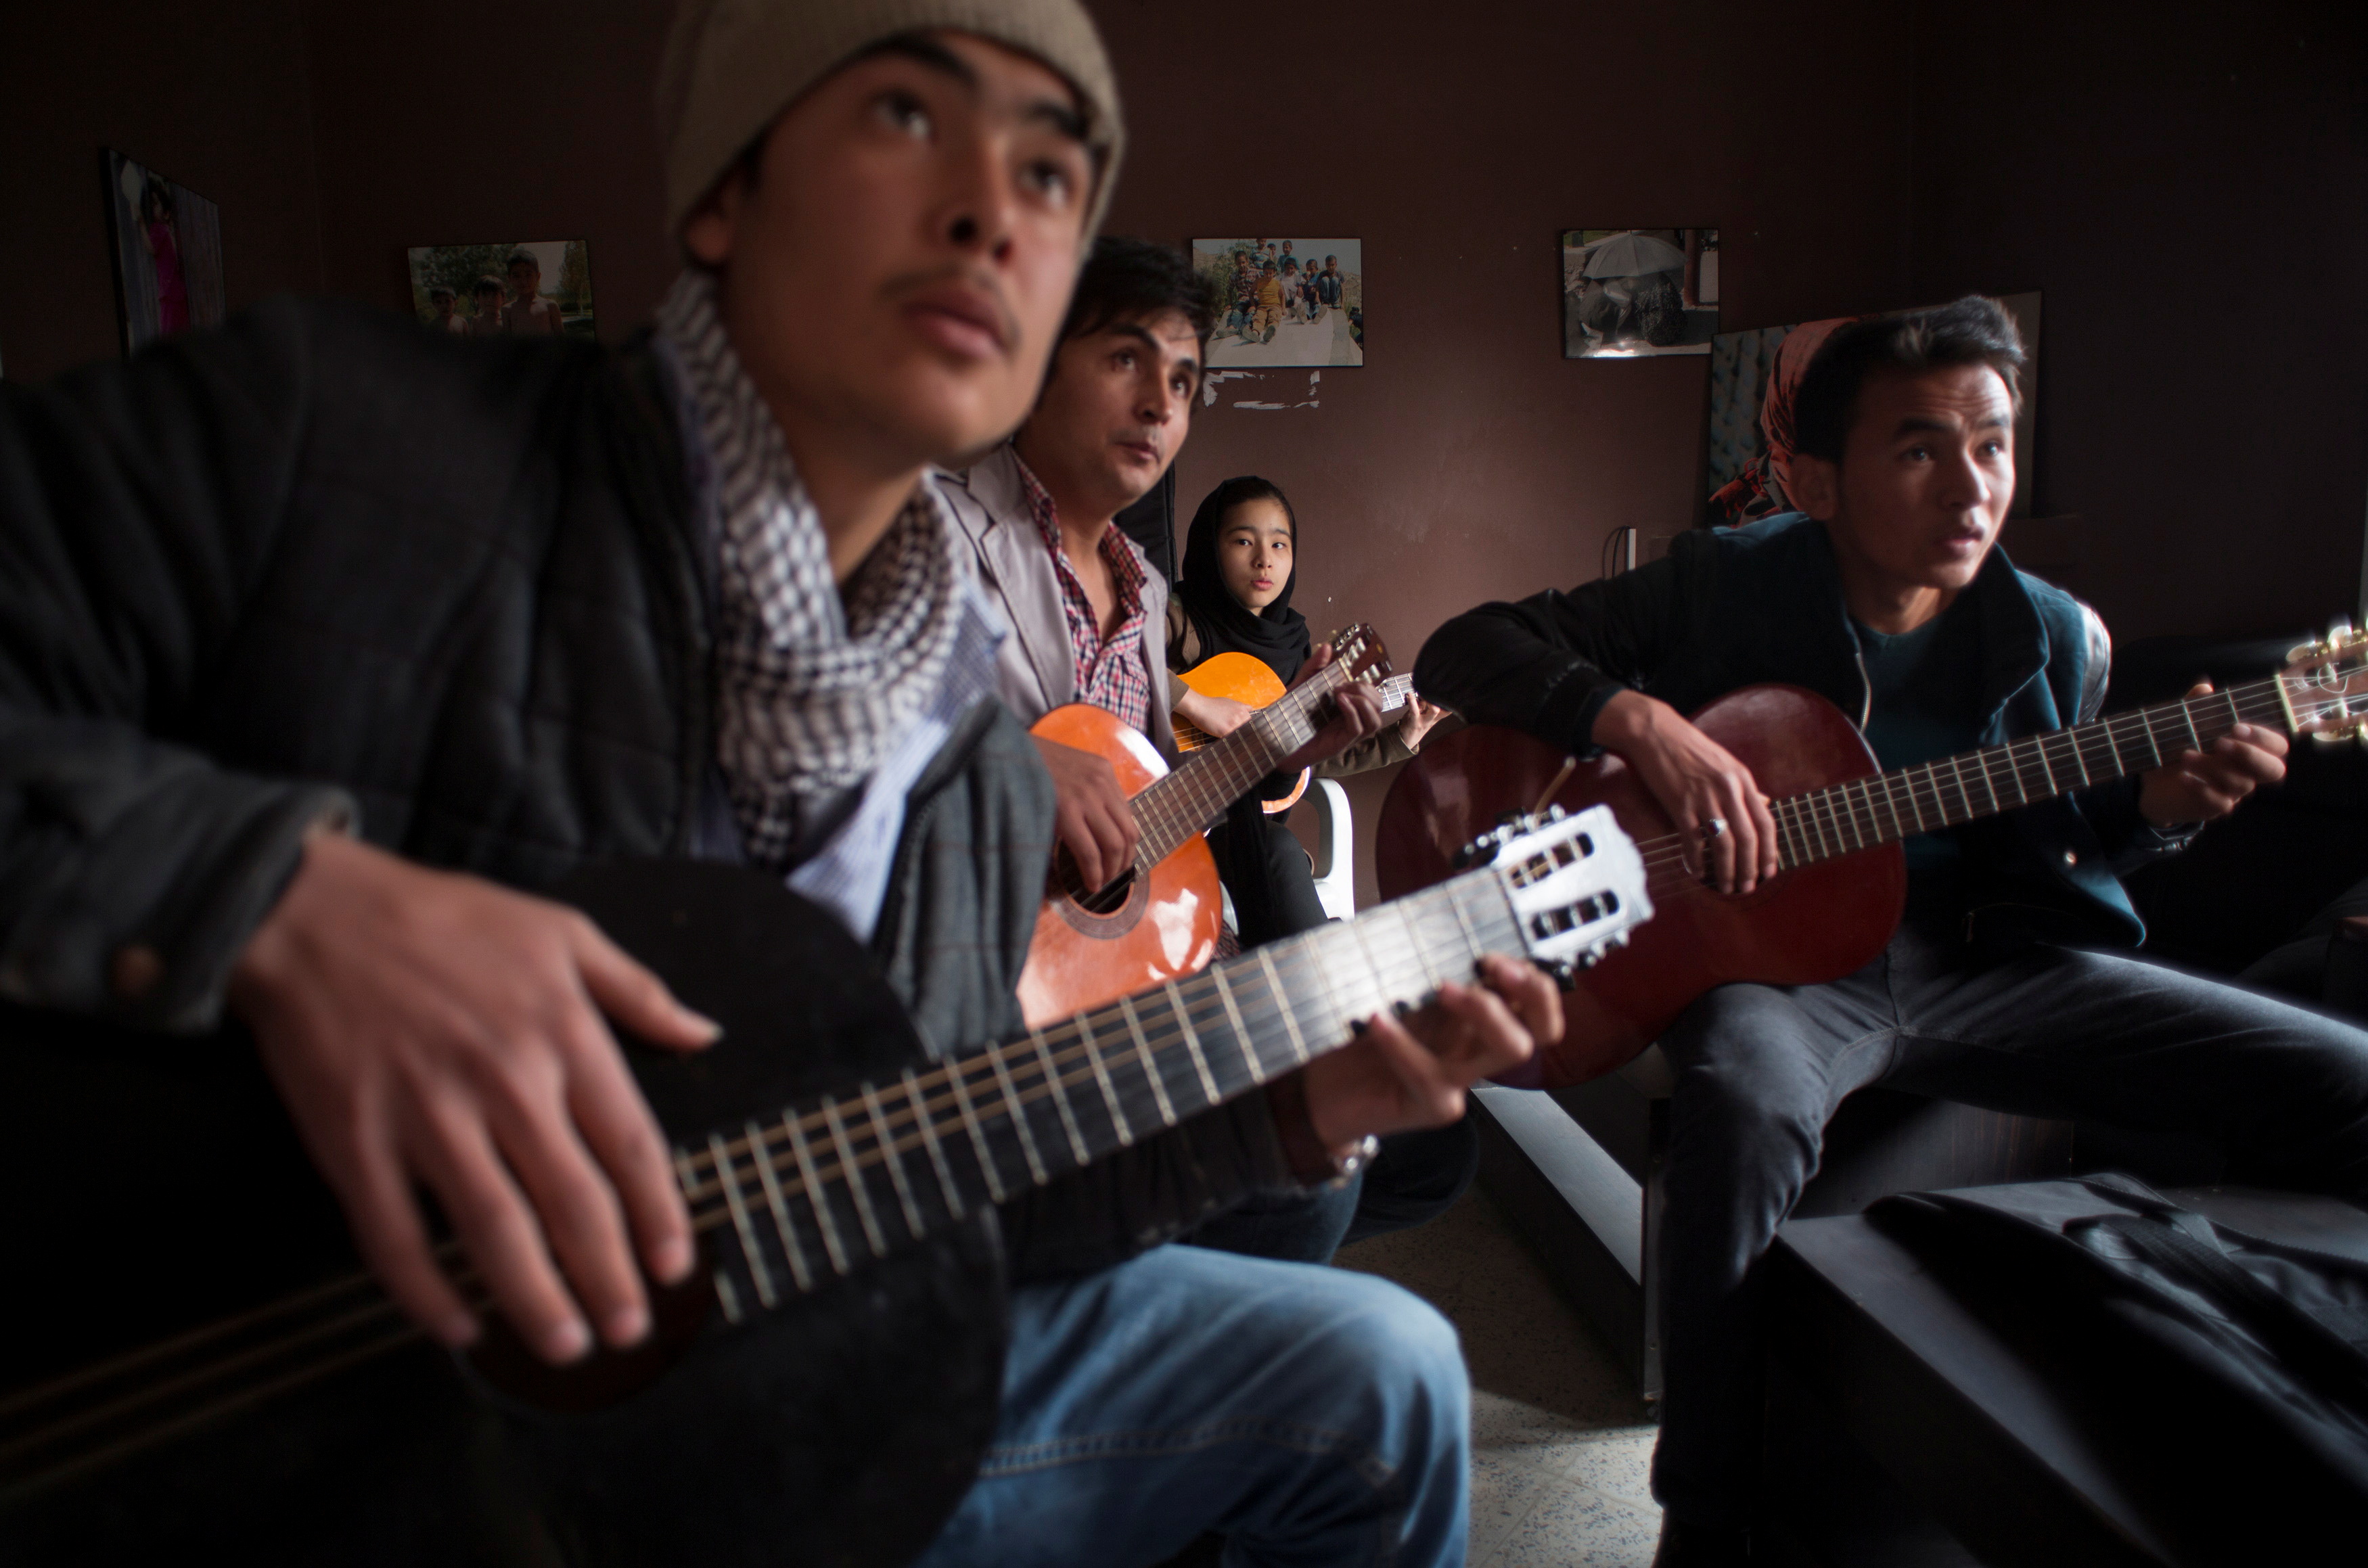 Afghan music students participate in a music training session at a cultural and educational centre in Kabul